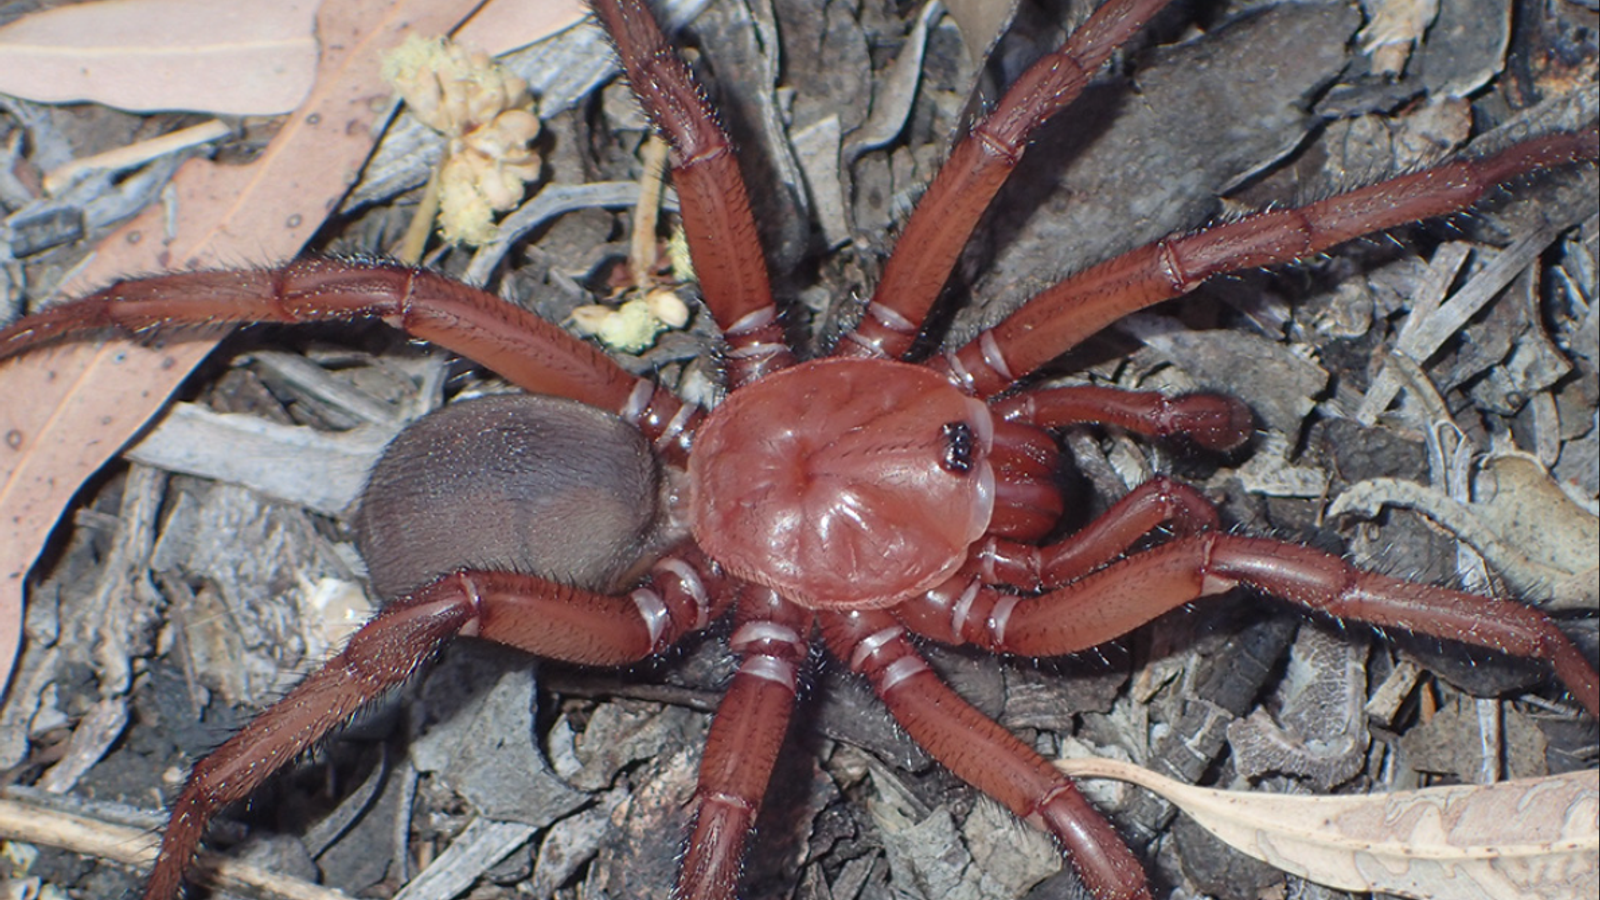 New giant trapdoor spider discovered in Australia – ‘it’s a big, beautiful species’